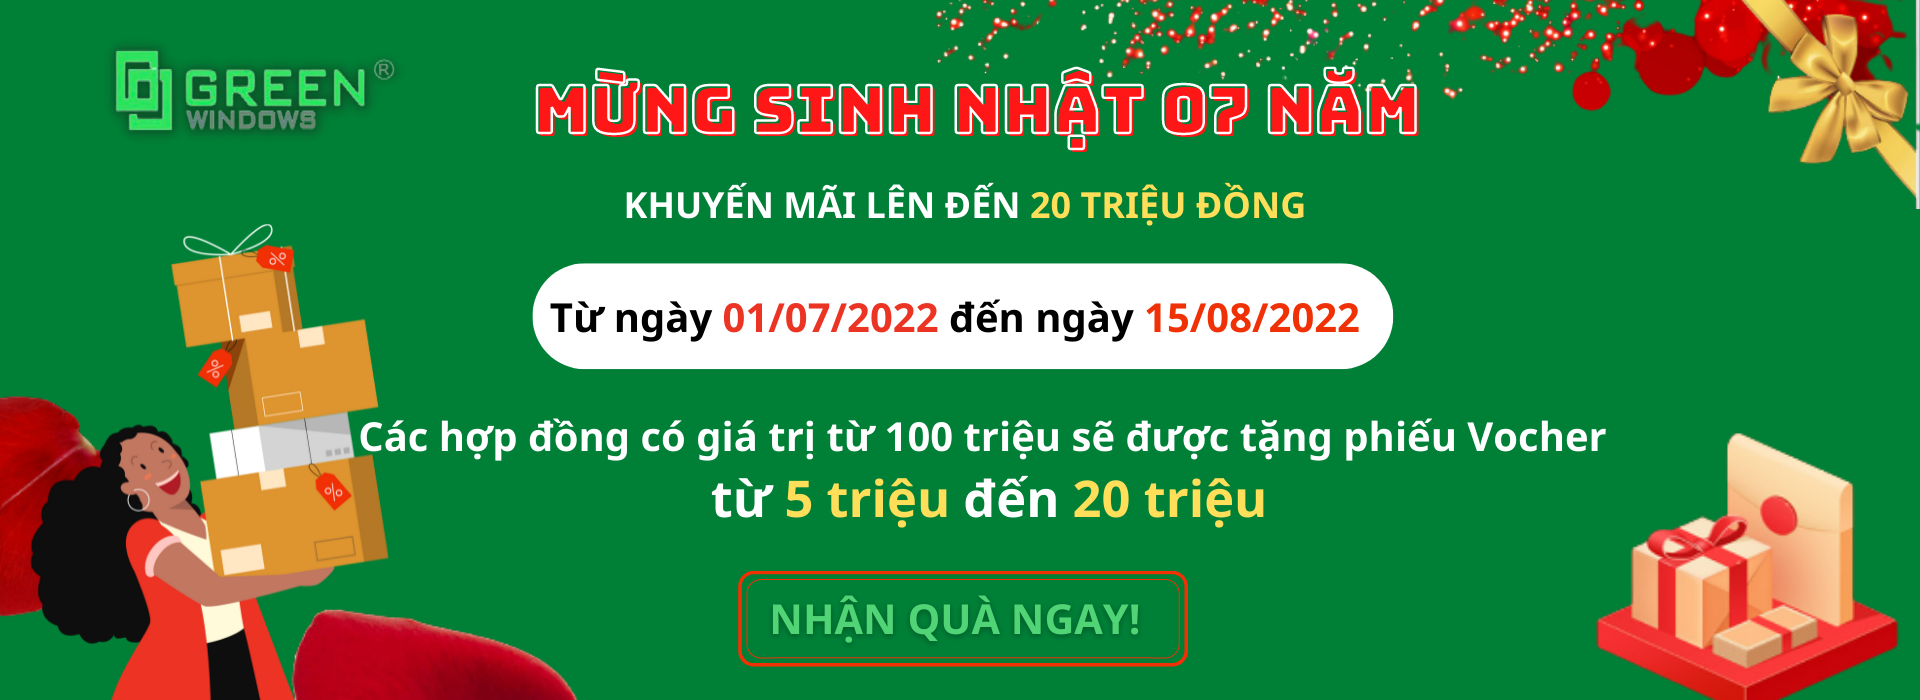 sinh nhat 7 tuoi